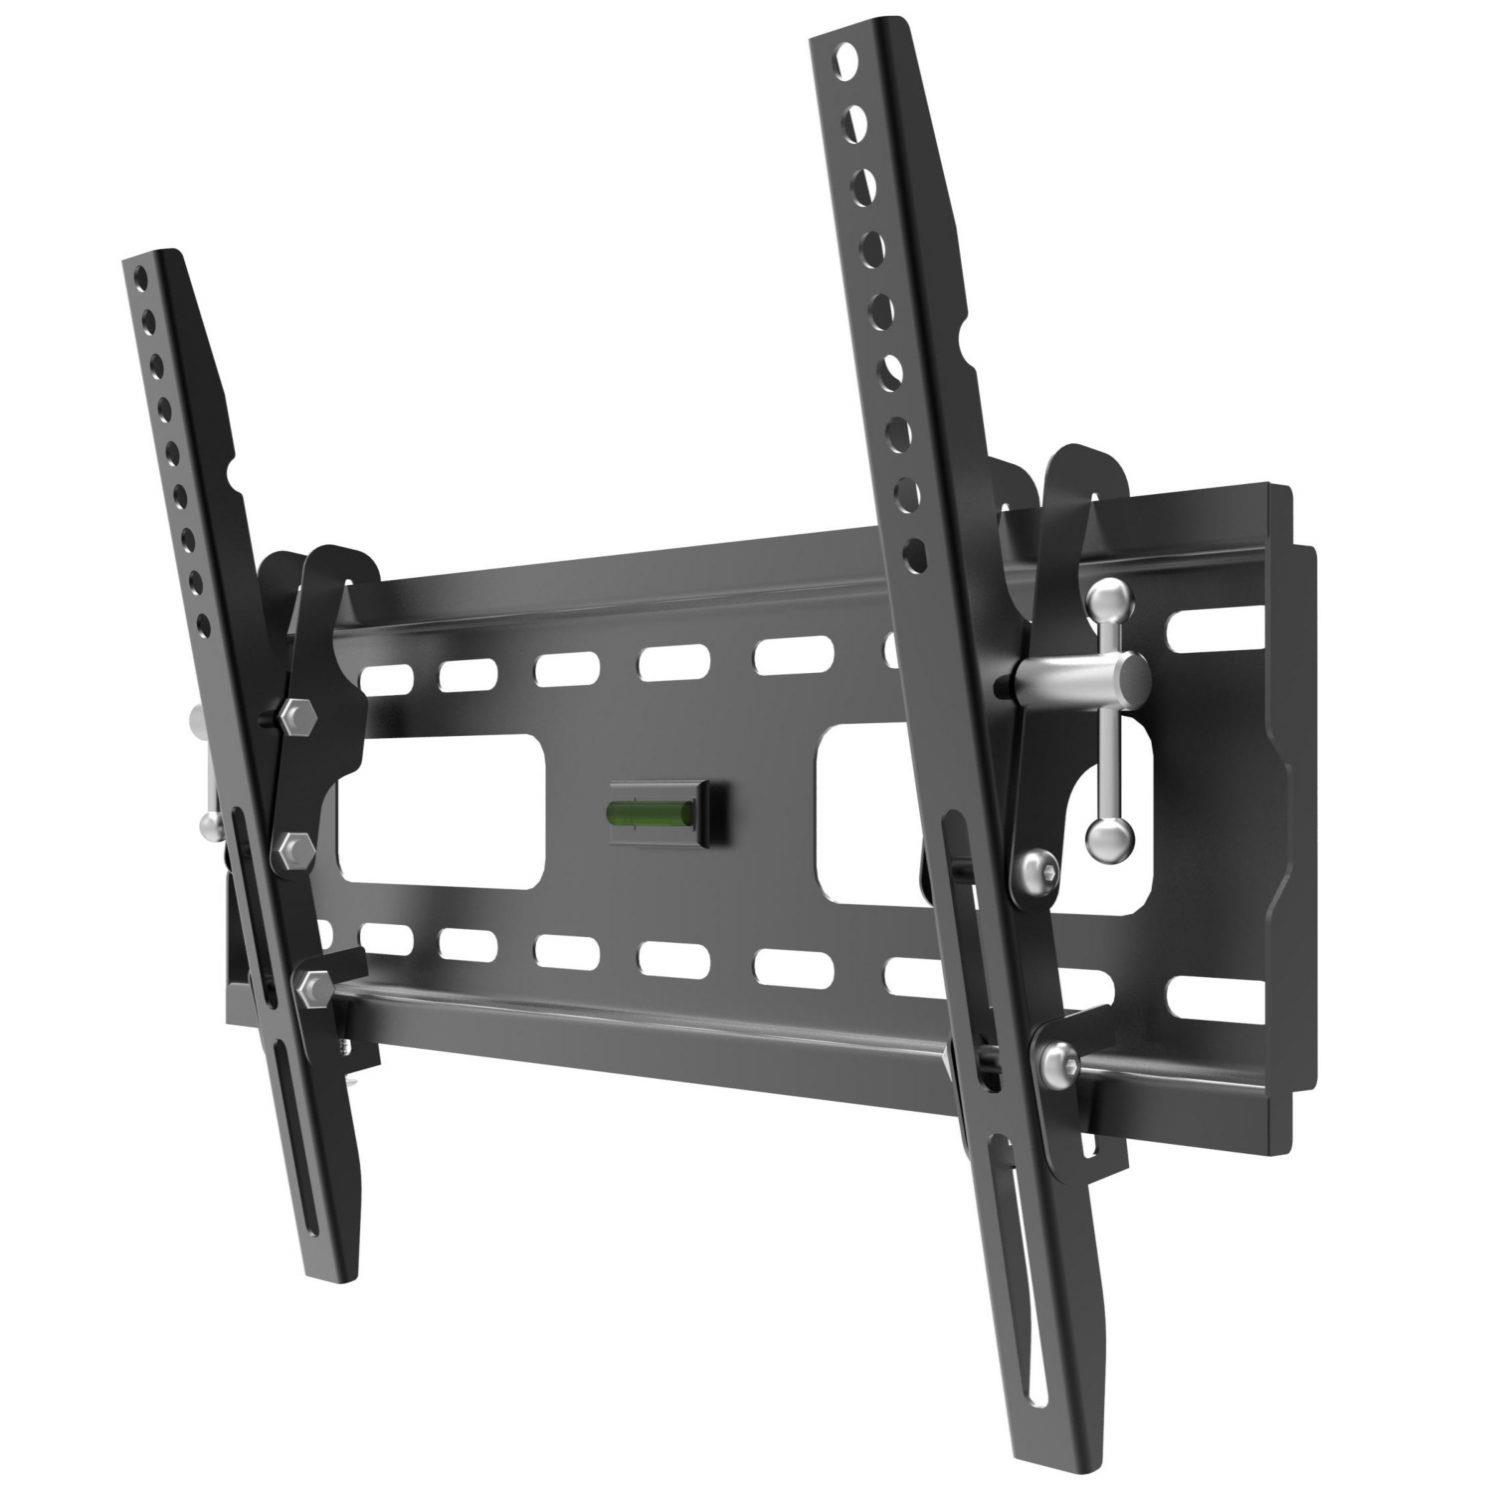 Fits 55pus680412 Philips 55 Tv Bracket Wall Mount Fully Adjustable